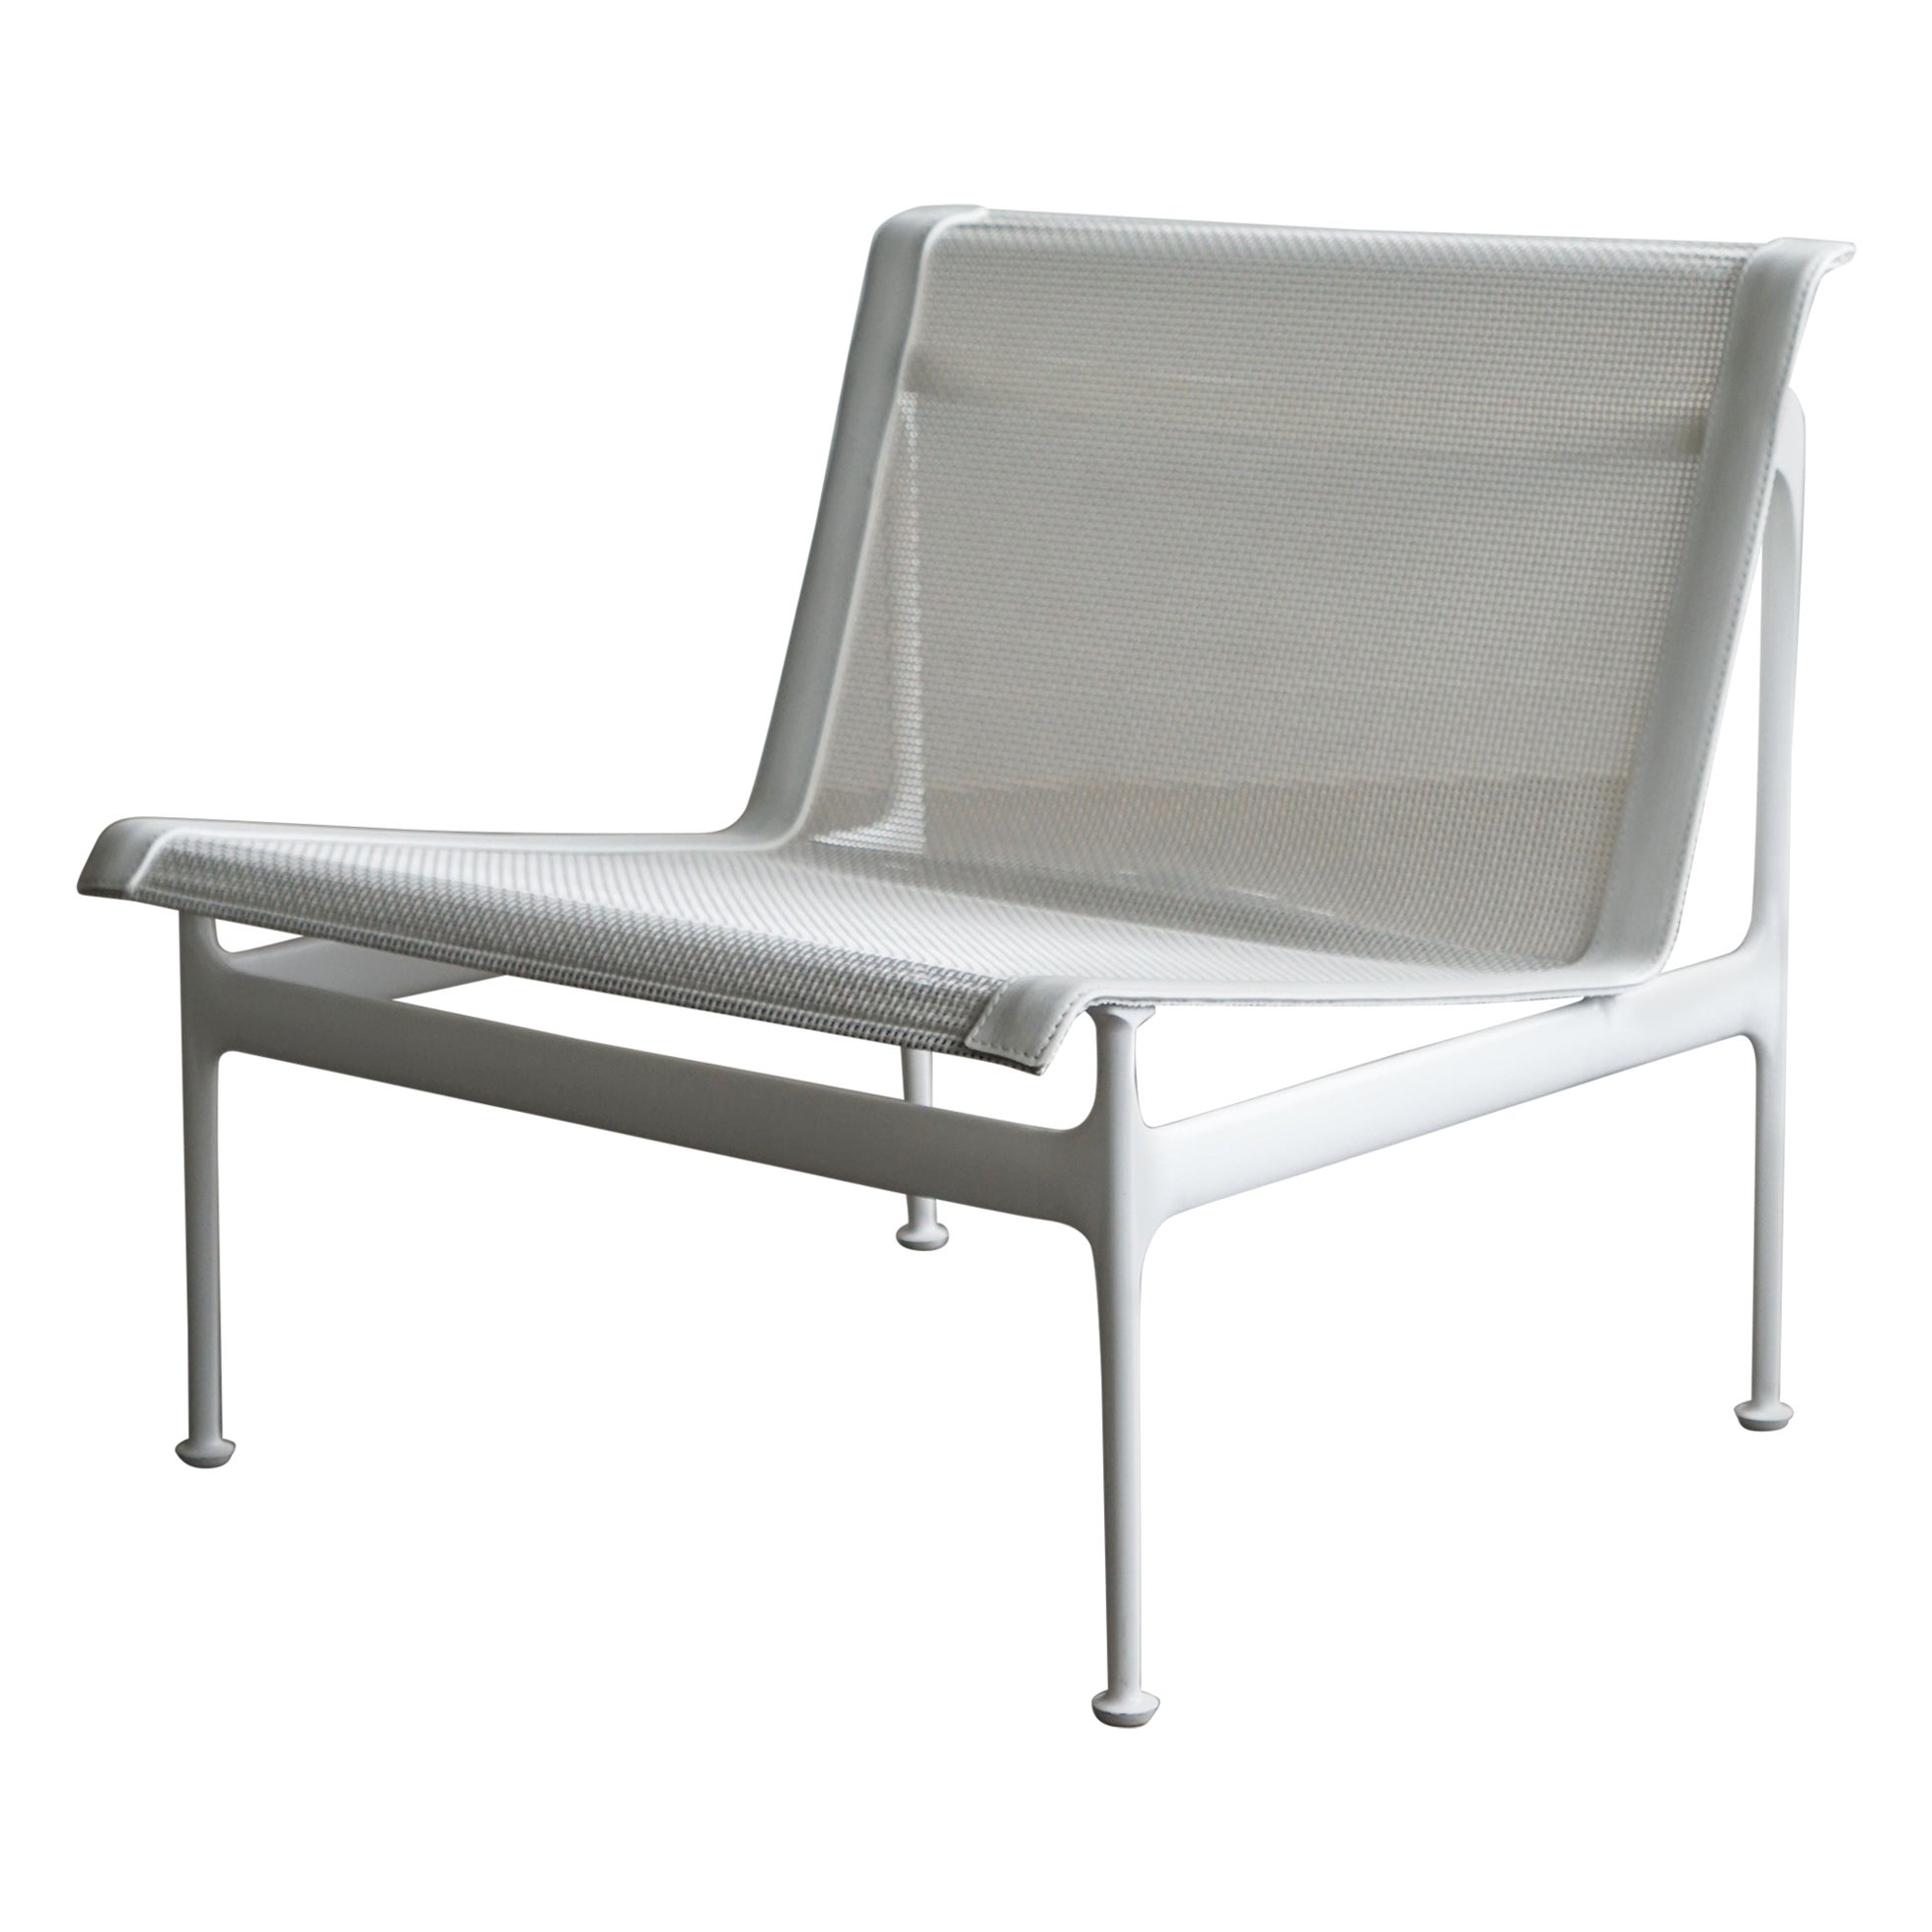 Richard Schultz Prototype Swell outdoor lounge chair For Sale